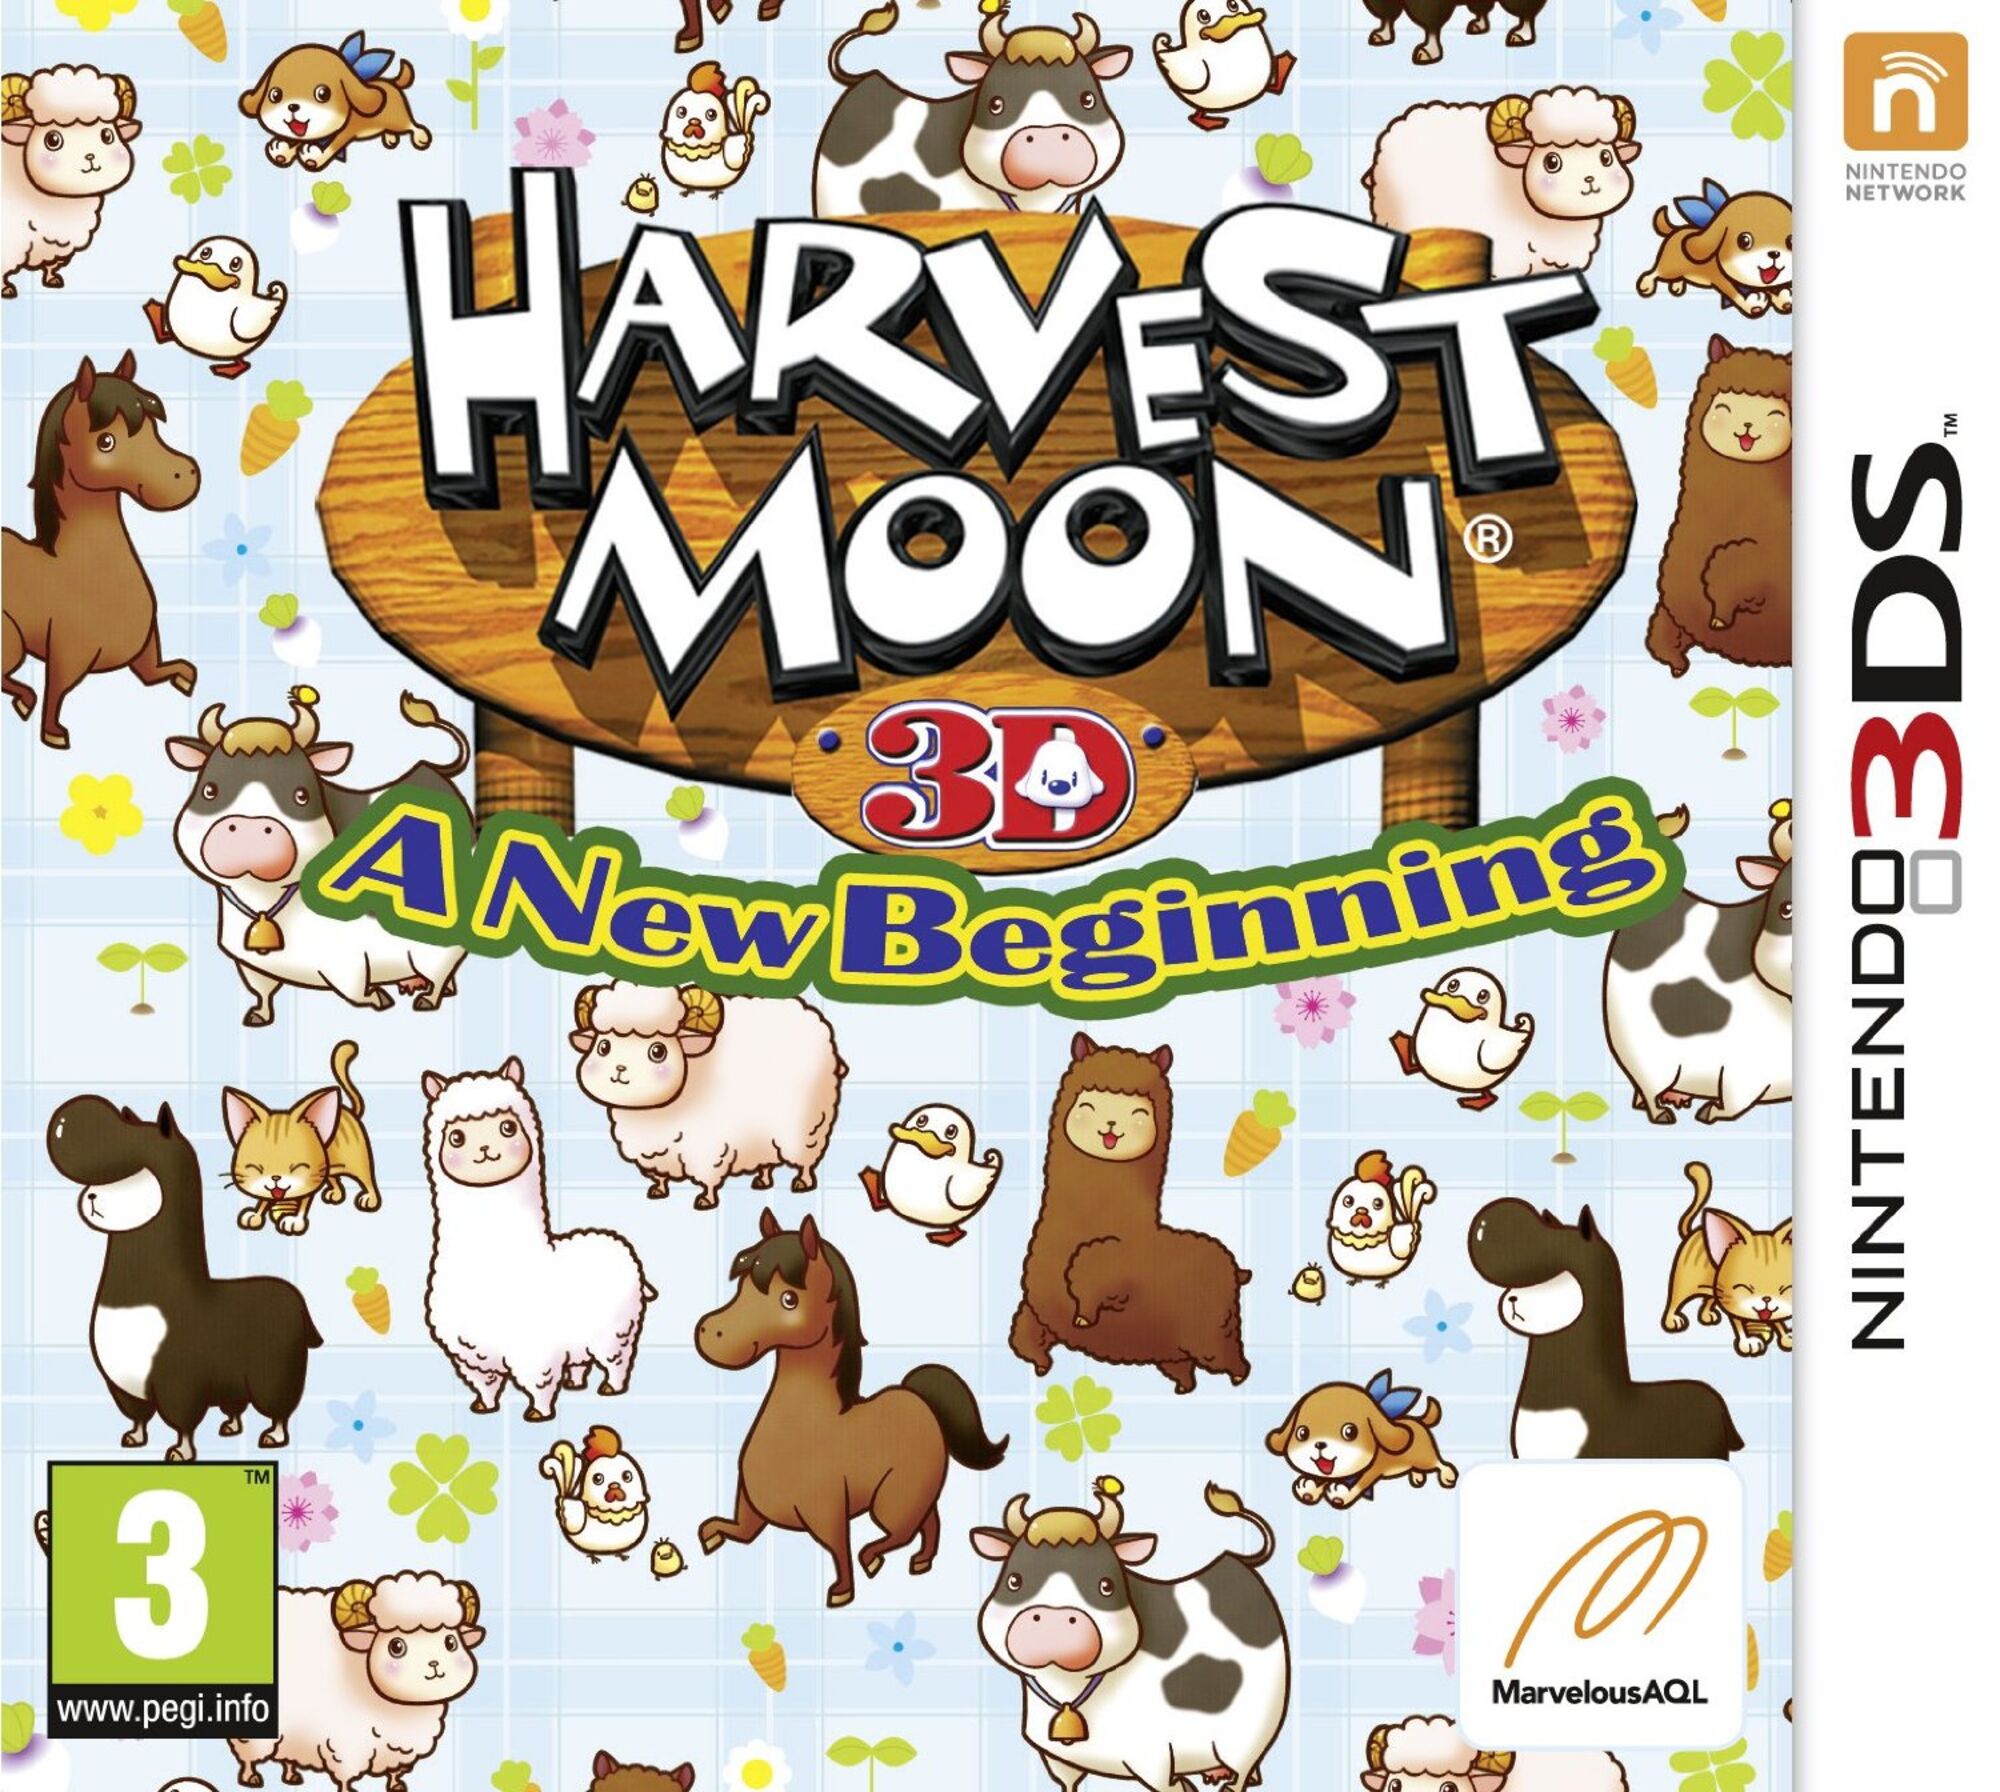 Collection 94+ Images starry night festival harvest moon a new beginning Latest